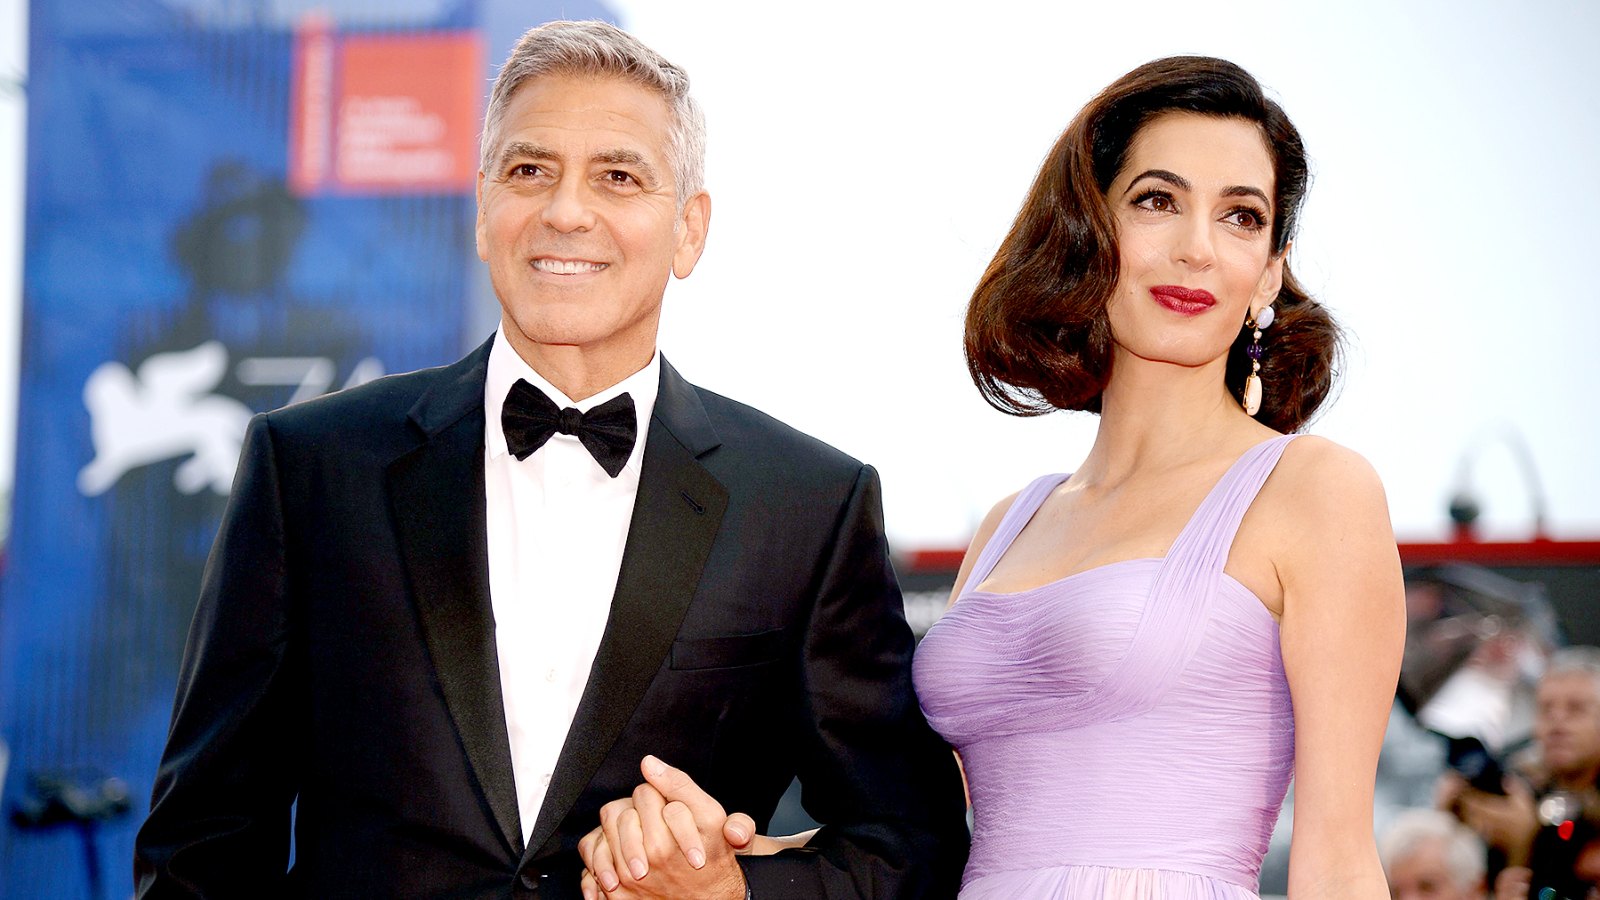 George Clooney and his wife Amal attend the premiere of the movie "Suburbicon" presented out of competition at the 74th Venice Film Festival on September 2, 2017 at Venice Lido.